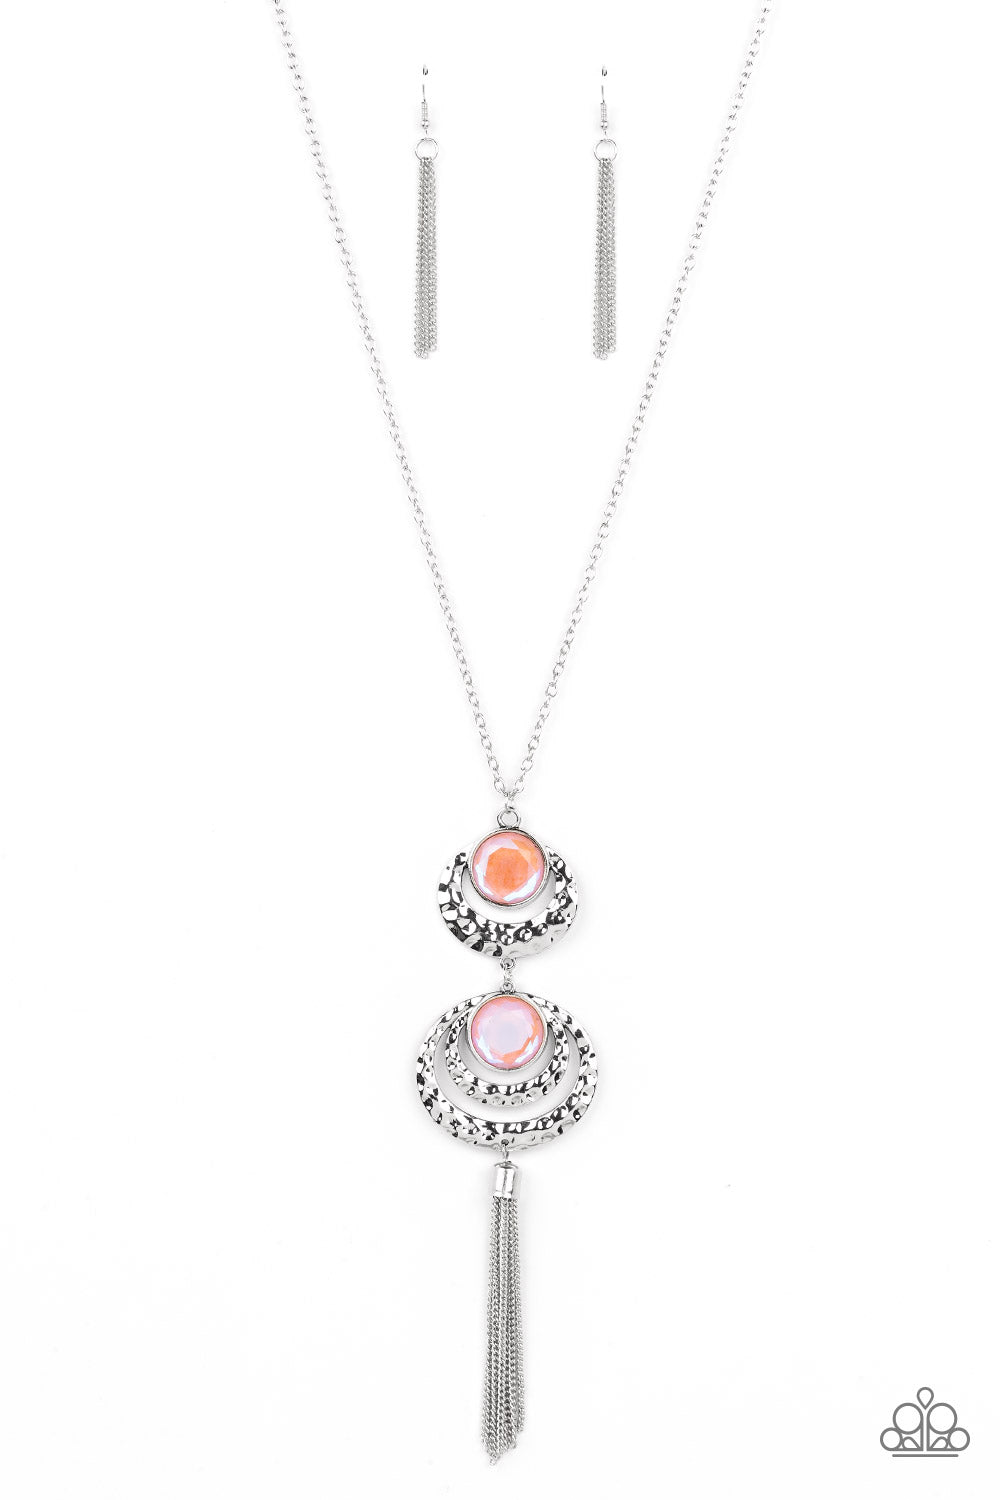 Limitless Luster - Orange Prismatic Gems/Hammered Silver Bar Pendant Paparazzi Necklace & matching earrings